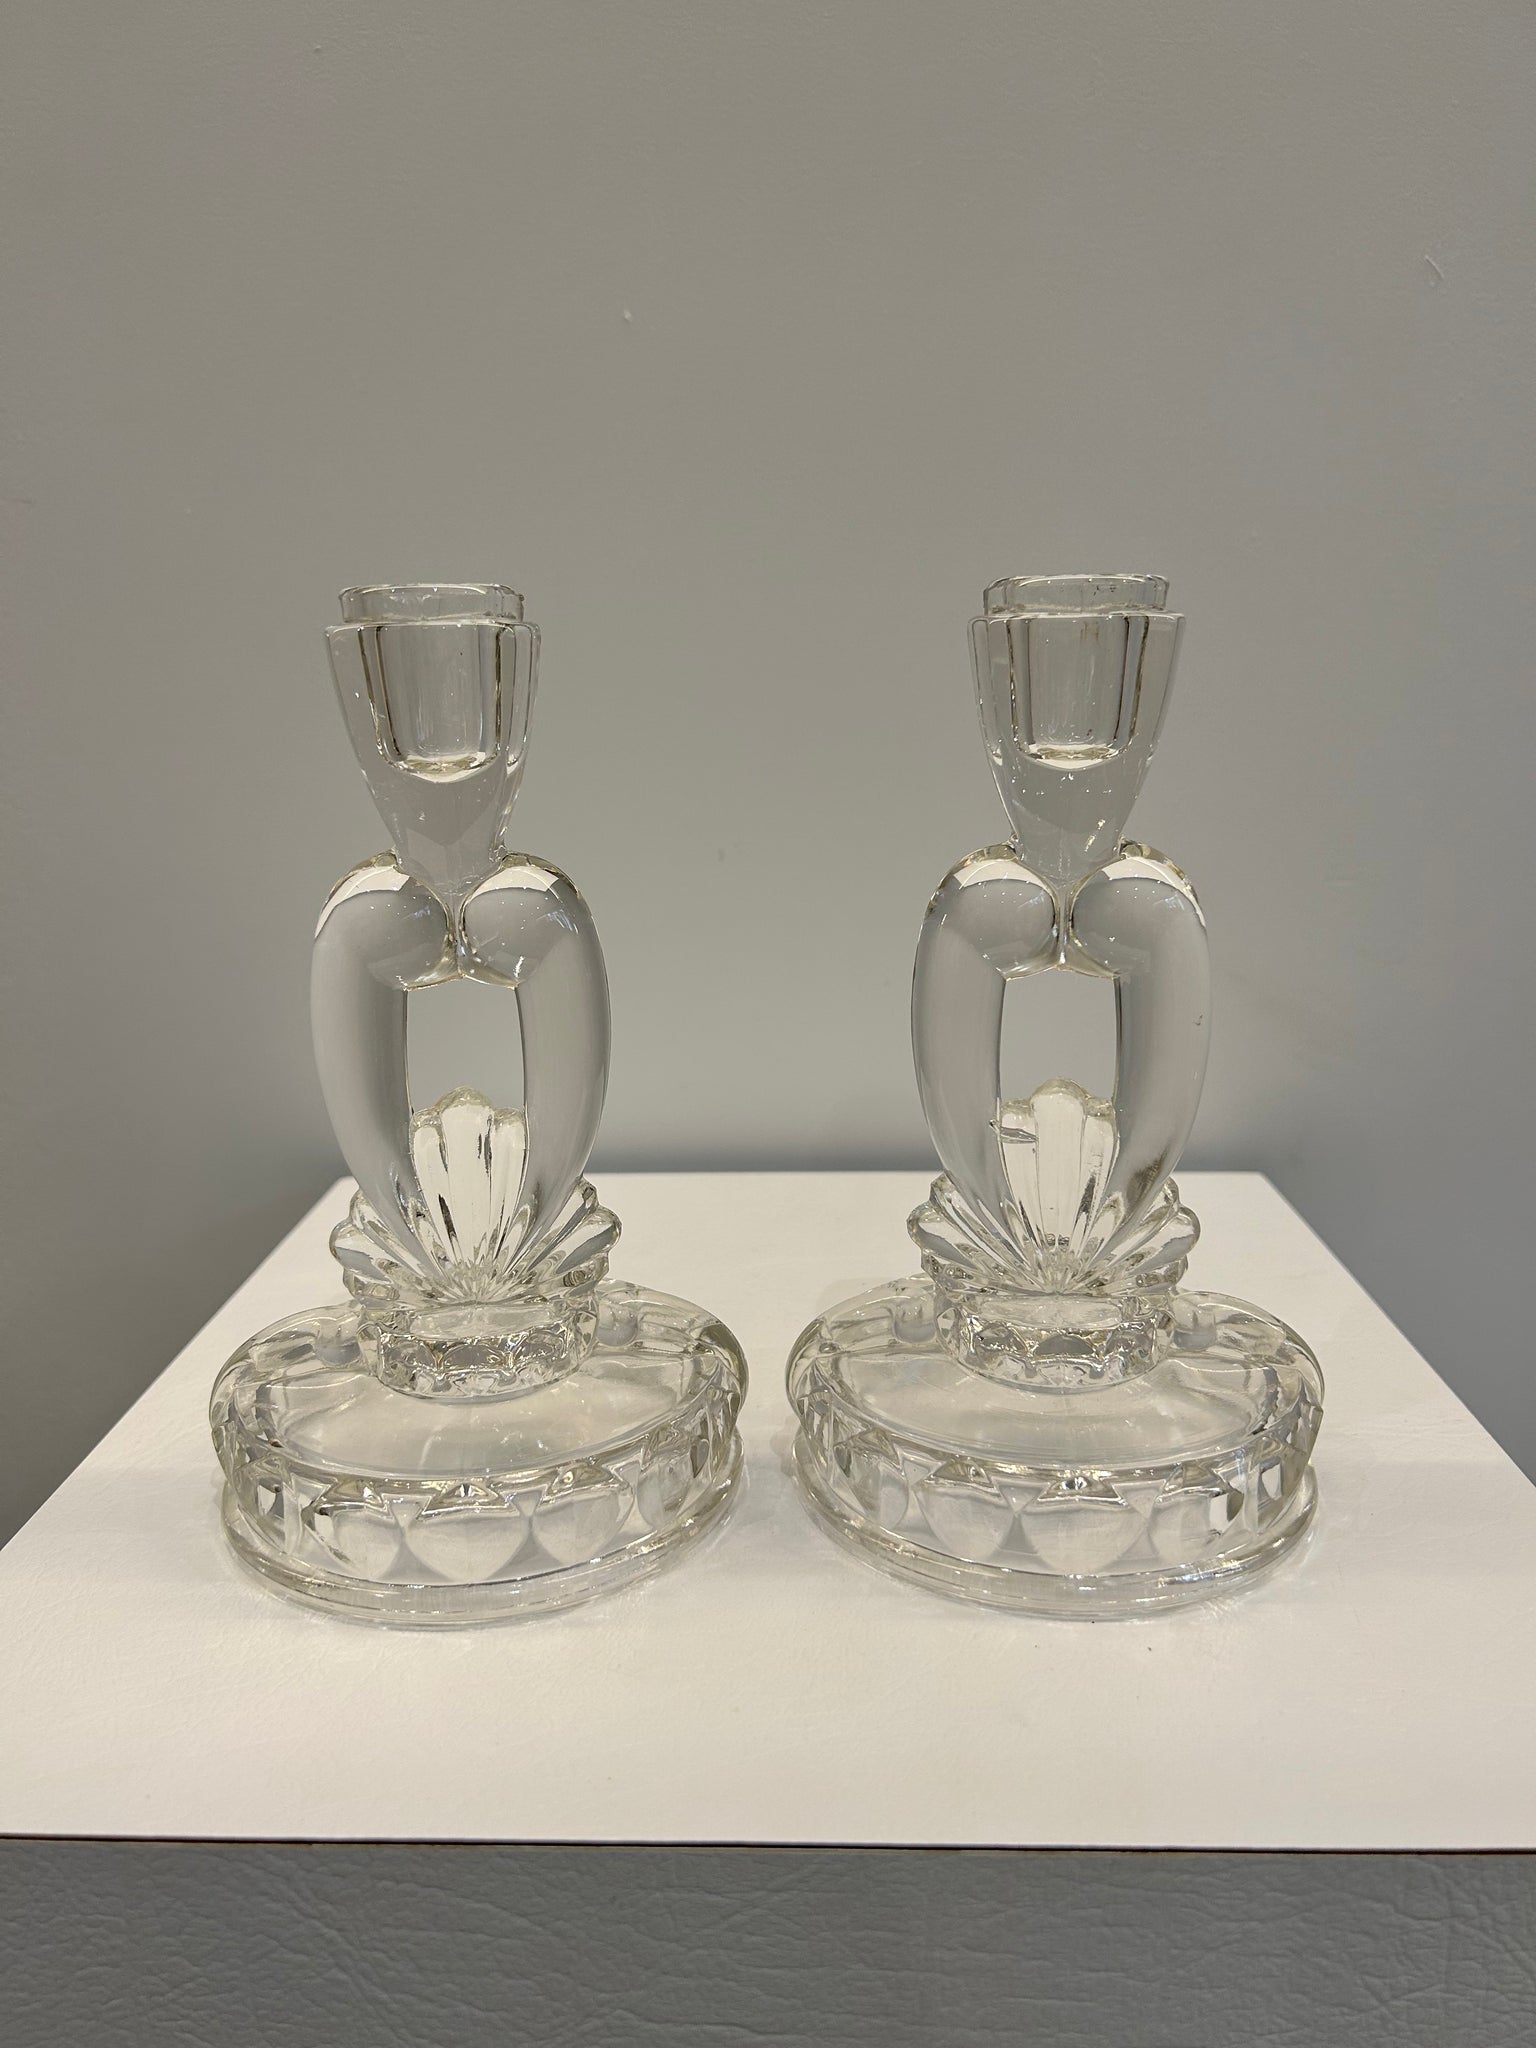 Thicc glass candle holders